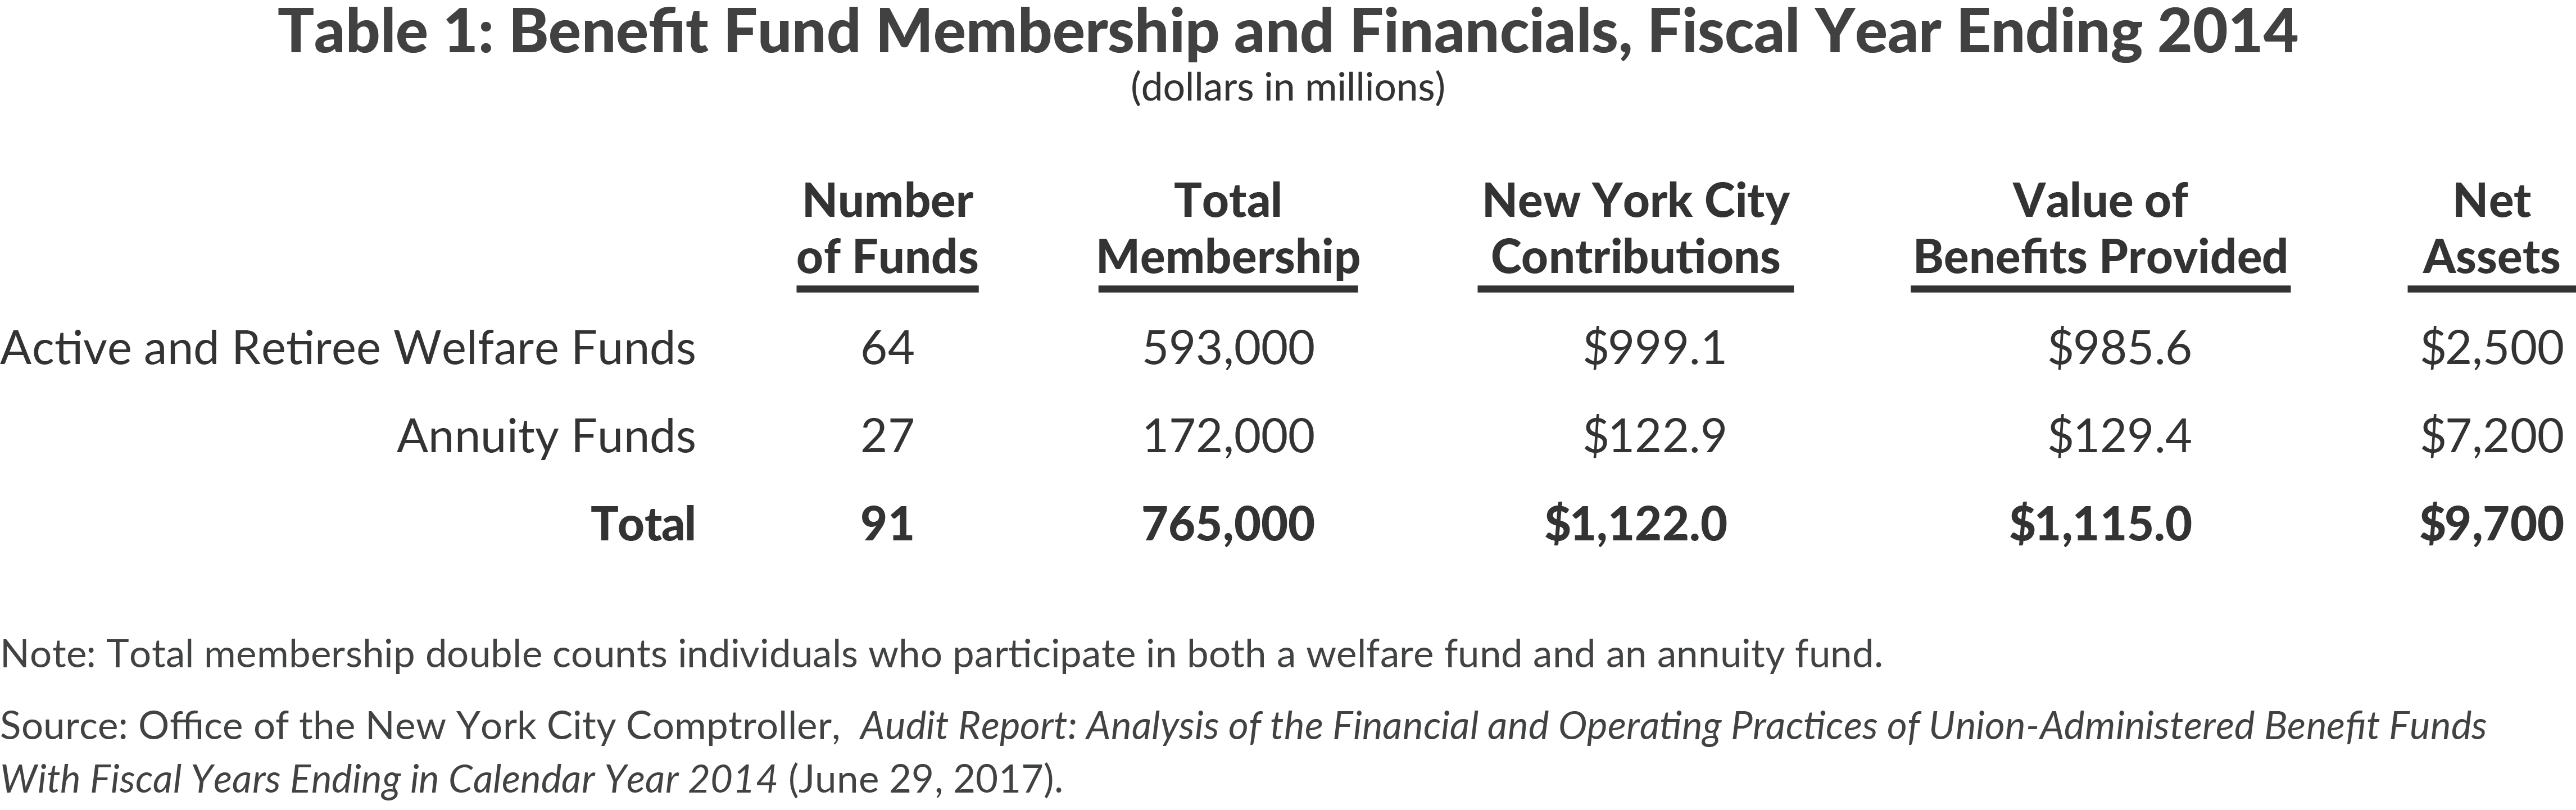 Table 1: Benefit Fund Membership and Financials, Fiscal Year Ending 2014